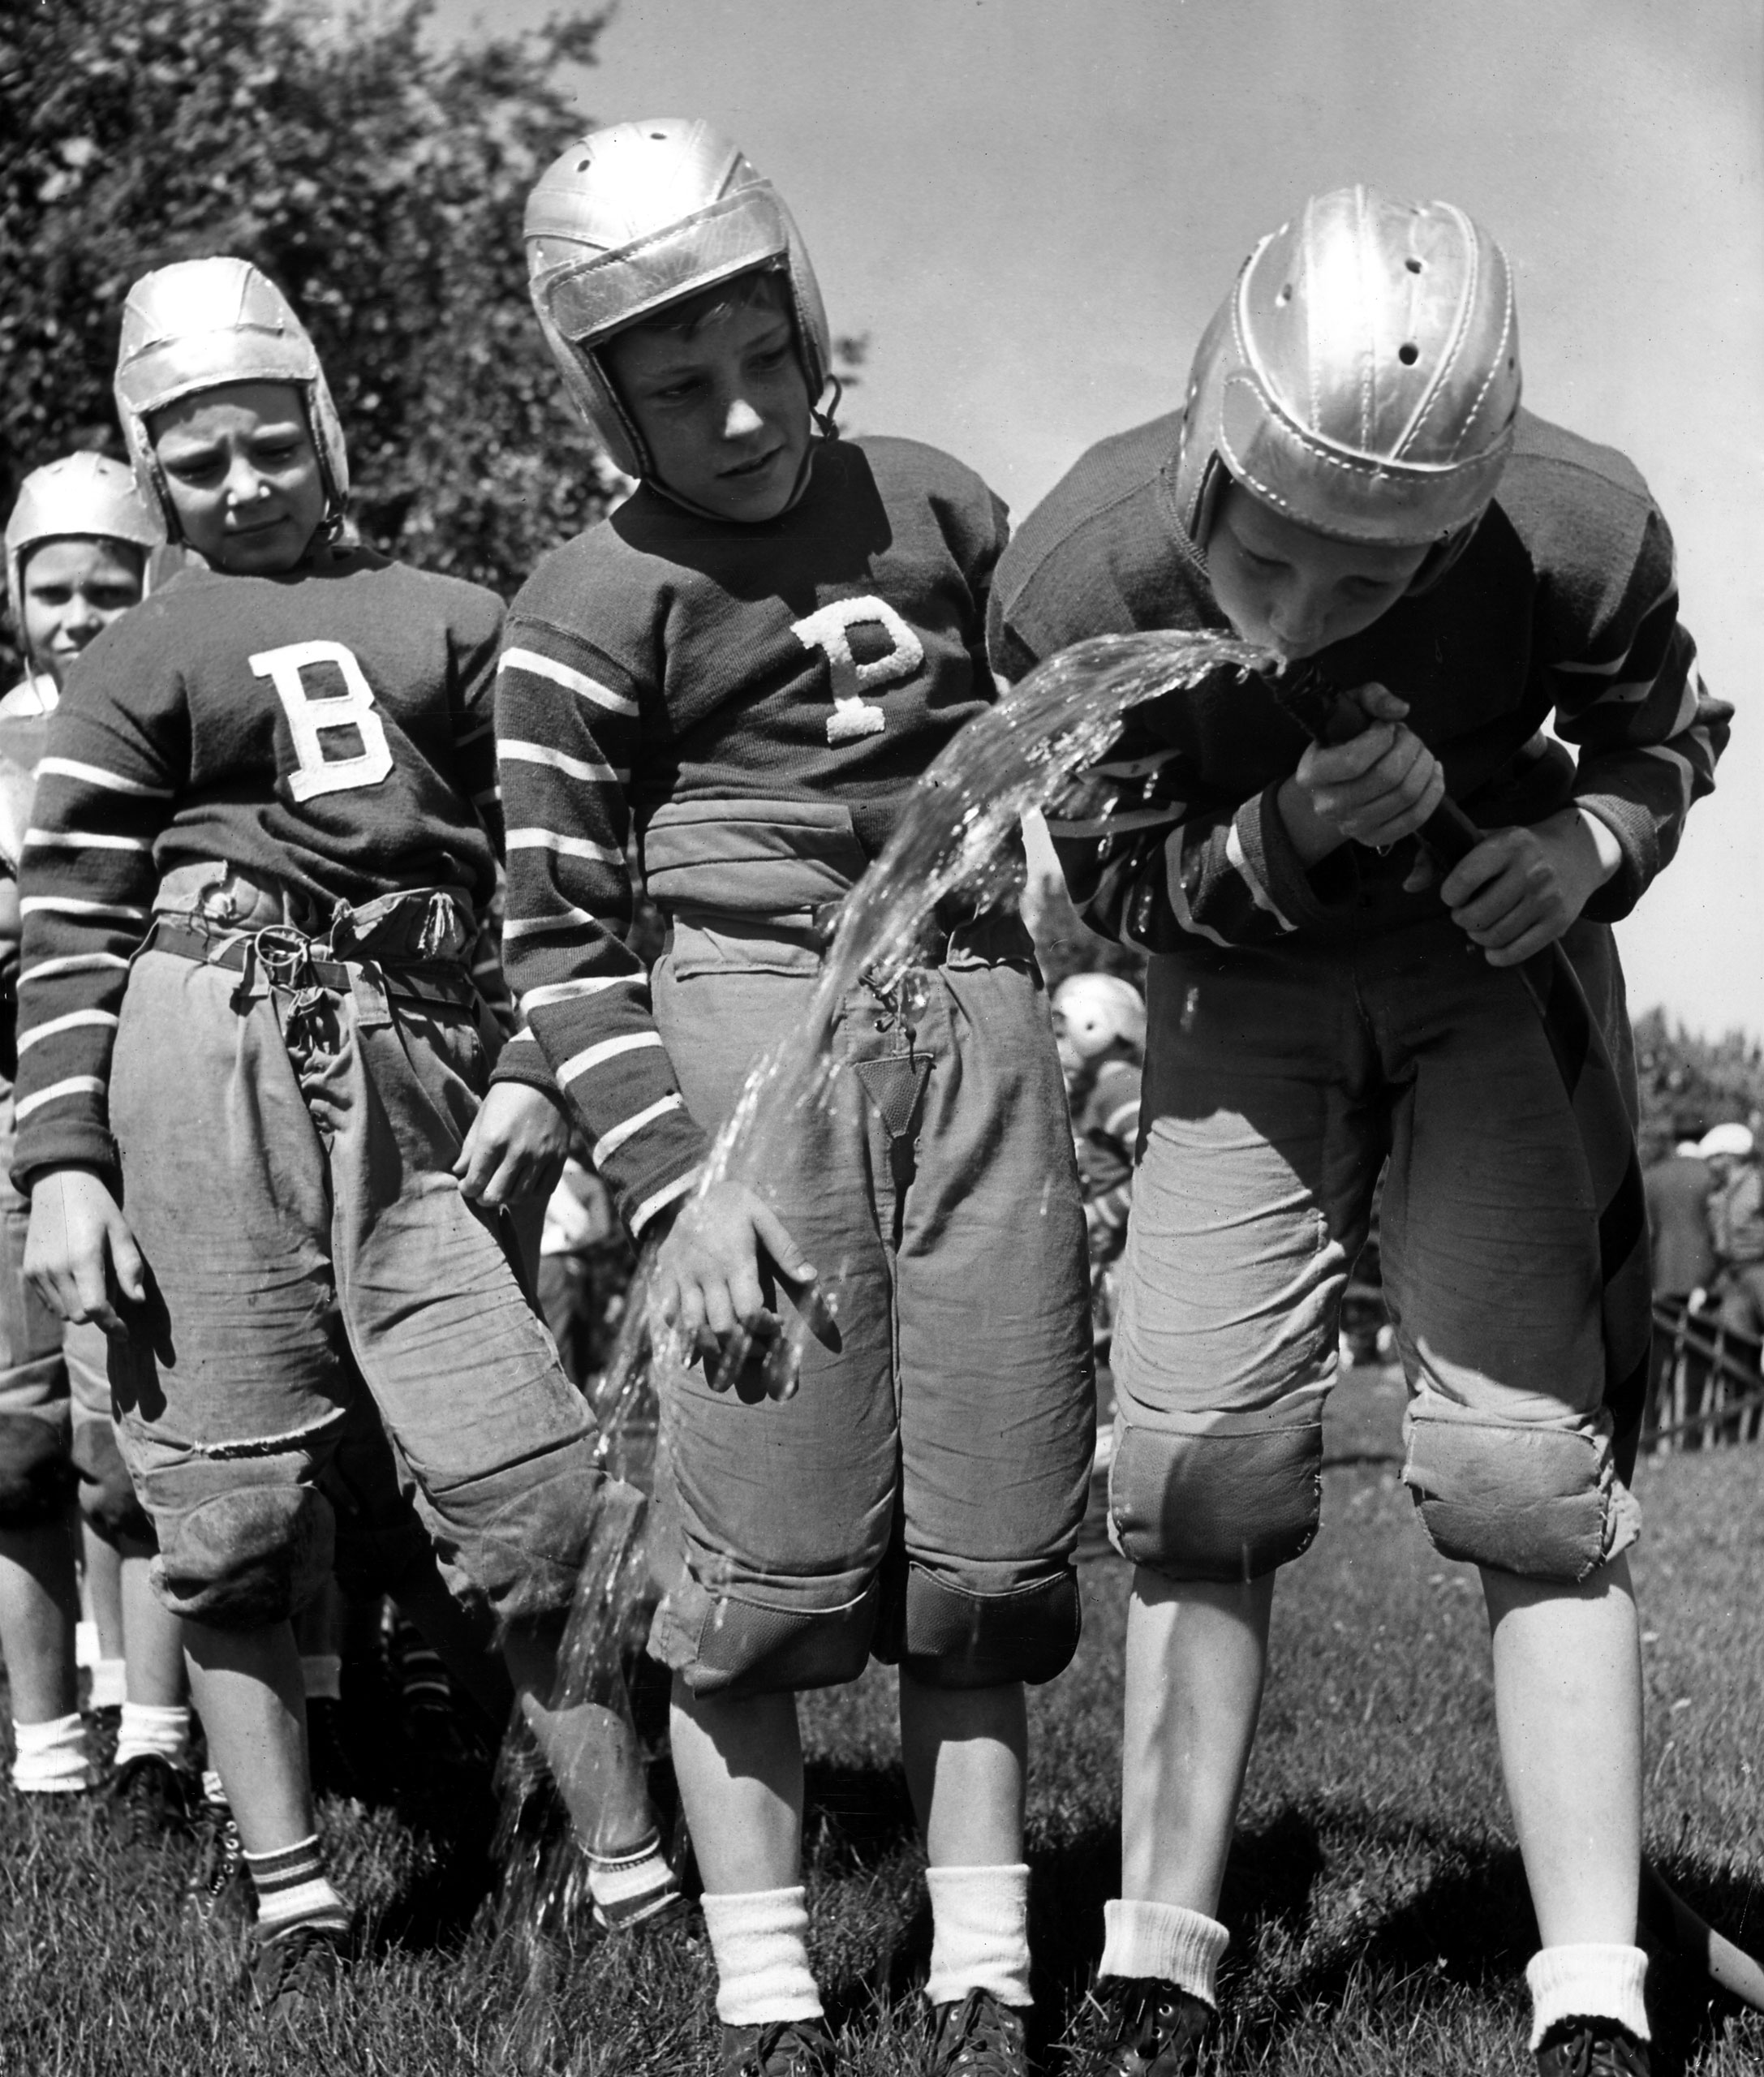 Thirsty young football players drink water from a garden hose in Denver, Colorado, in 1939.